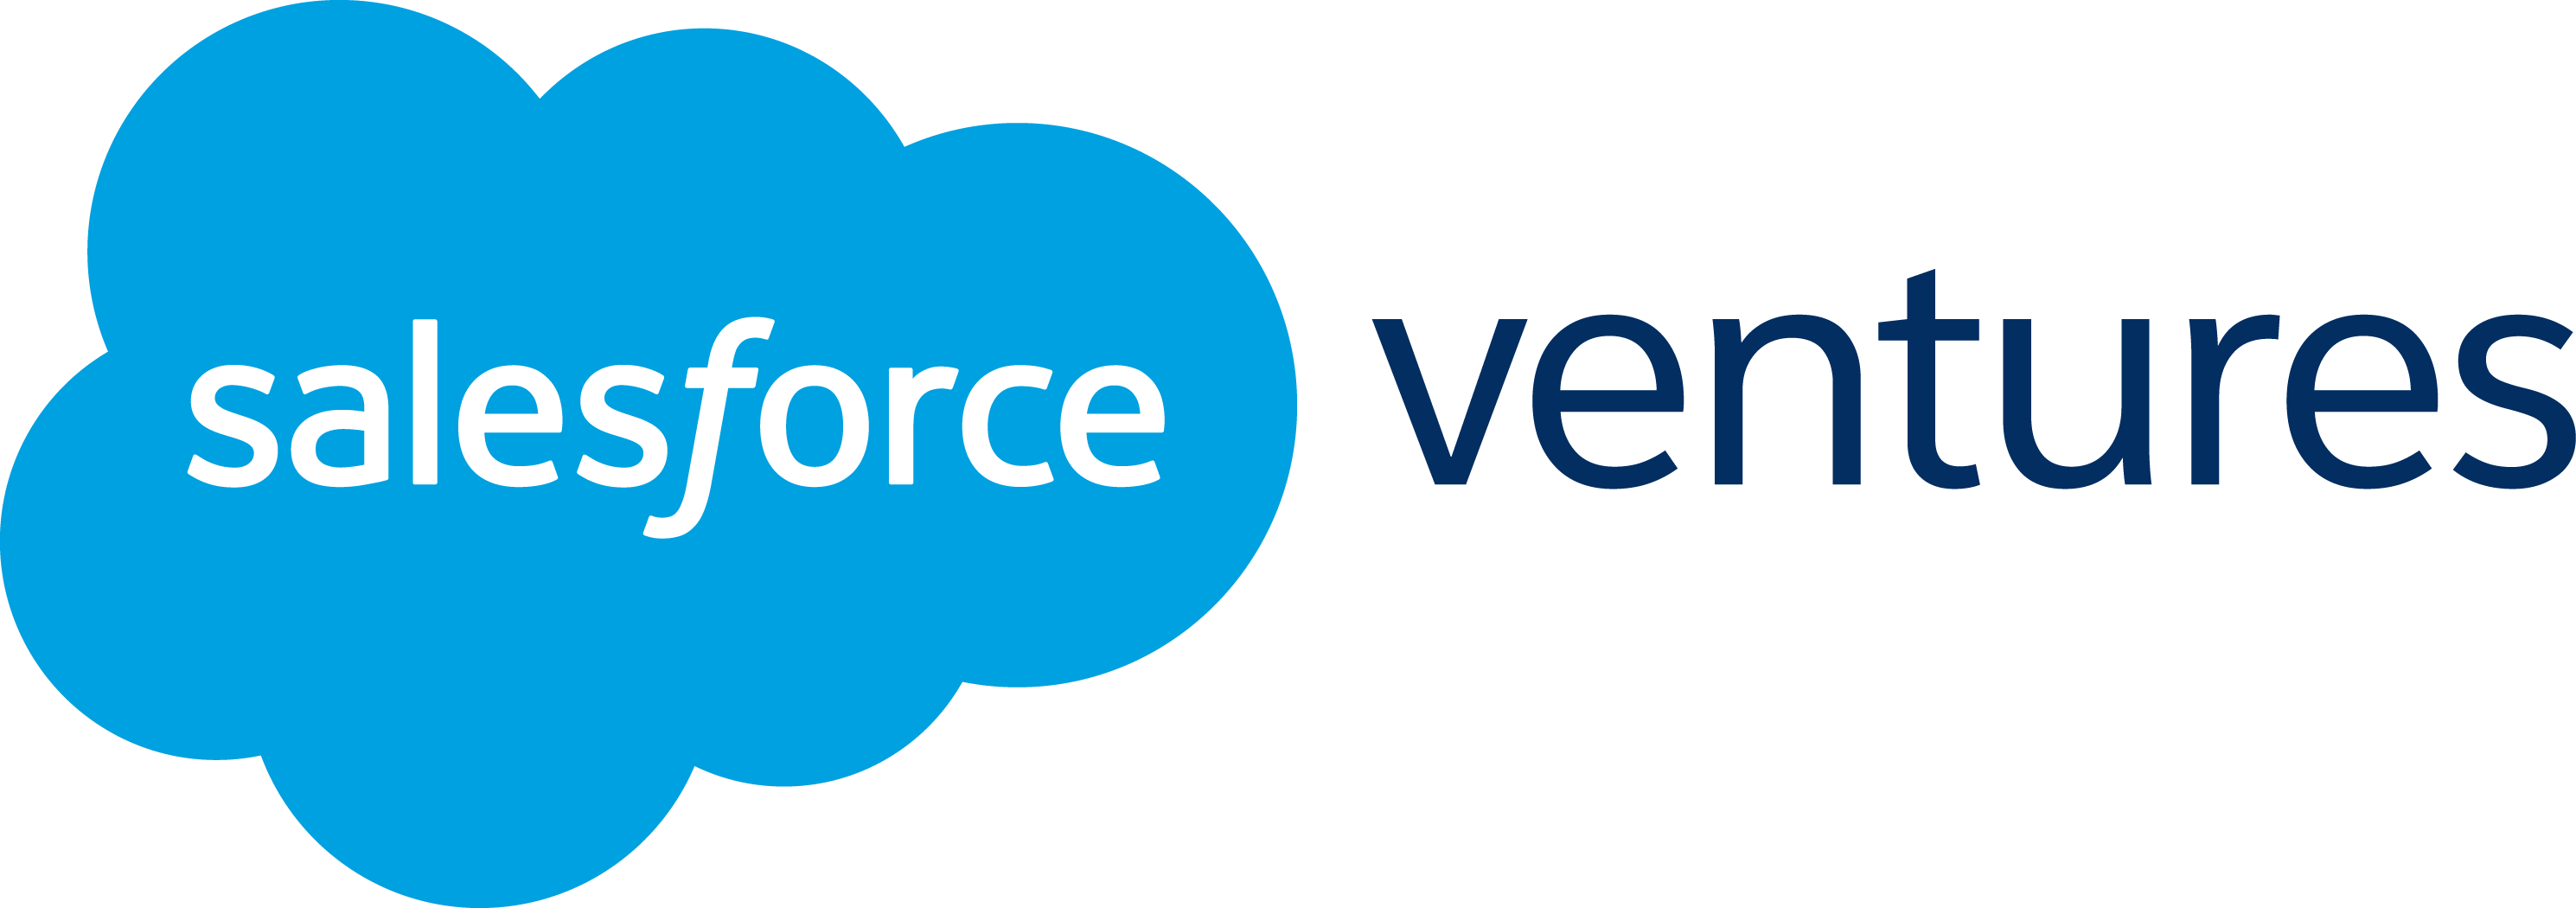 Salesforce Ventures | For The Most Enterprising Founders